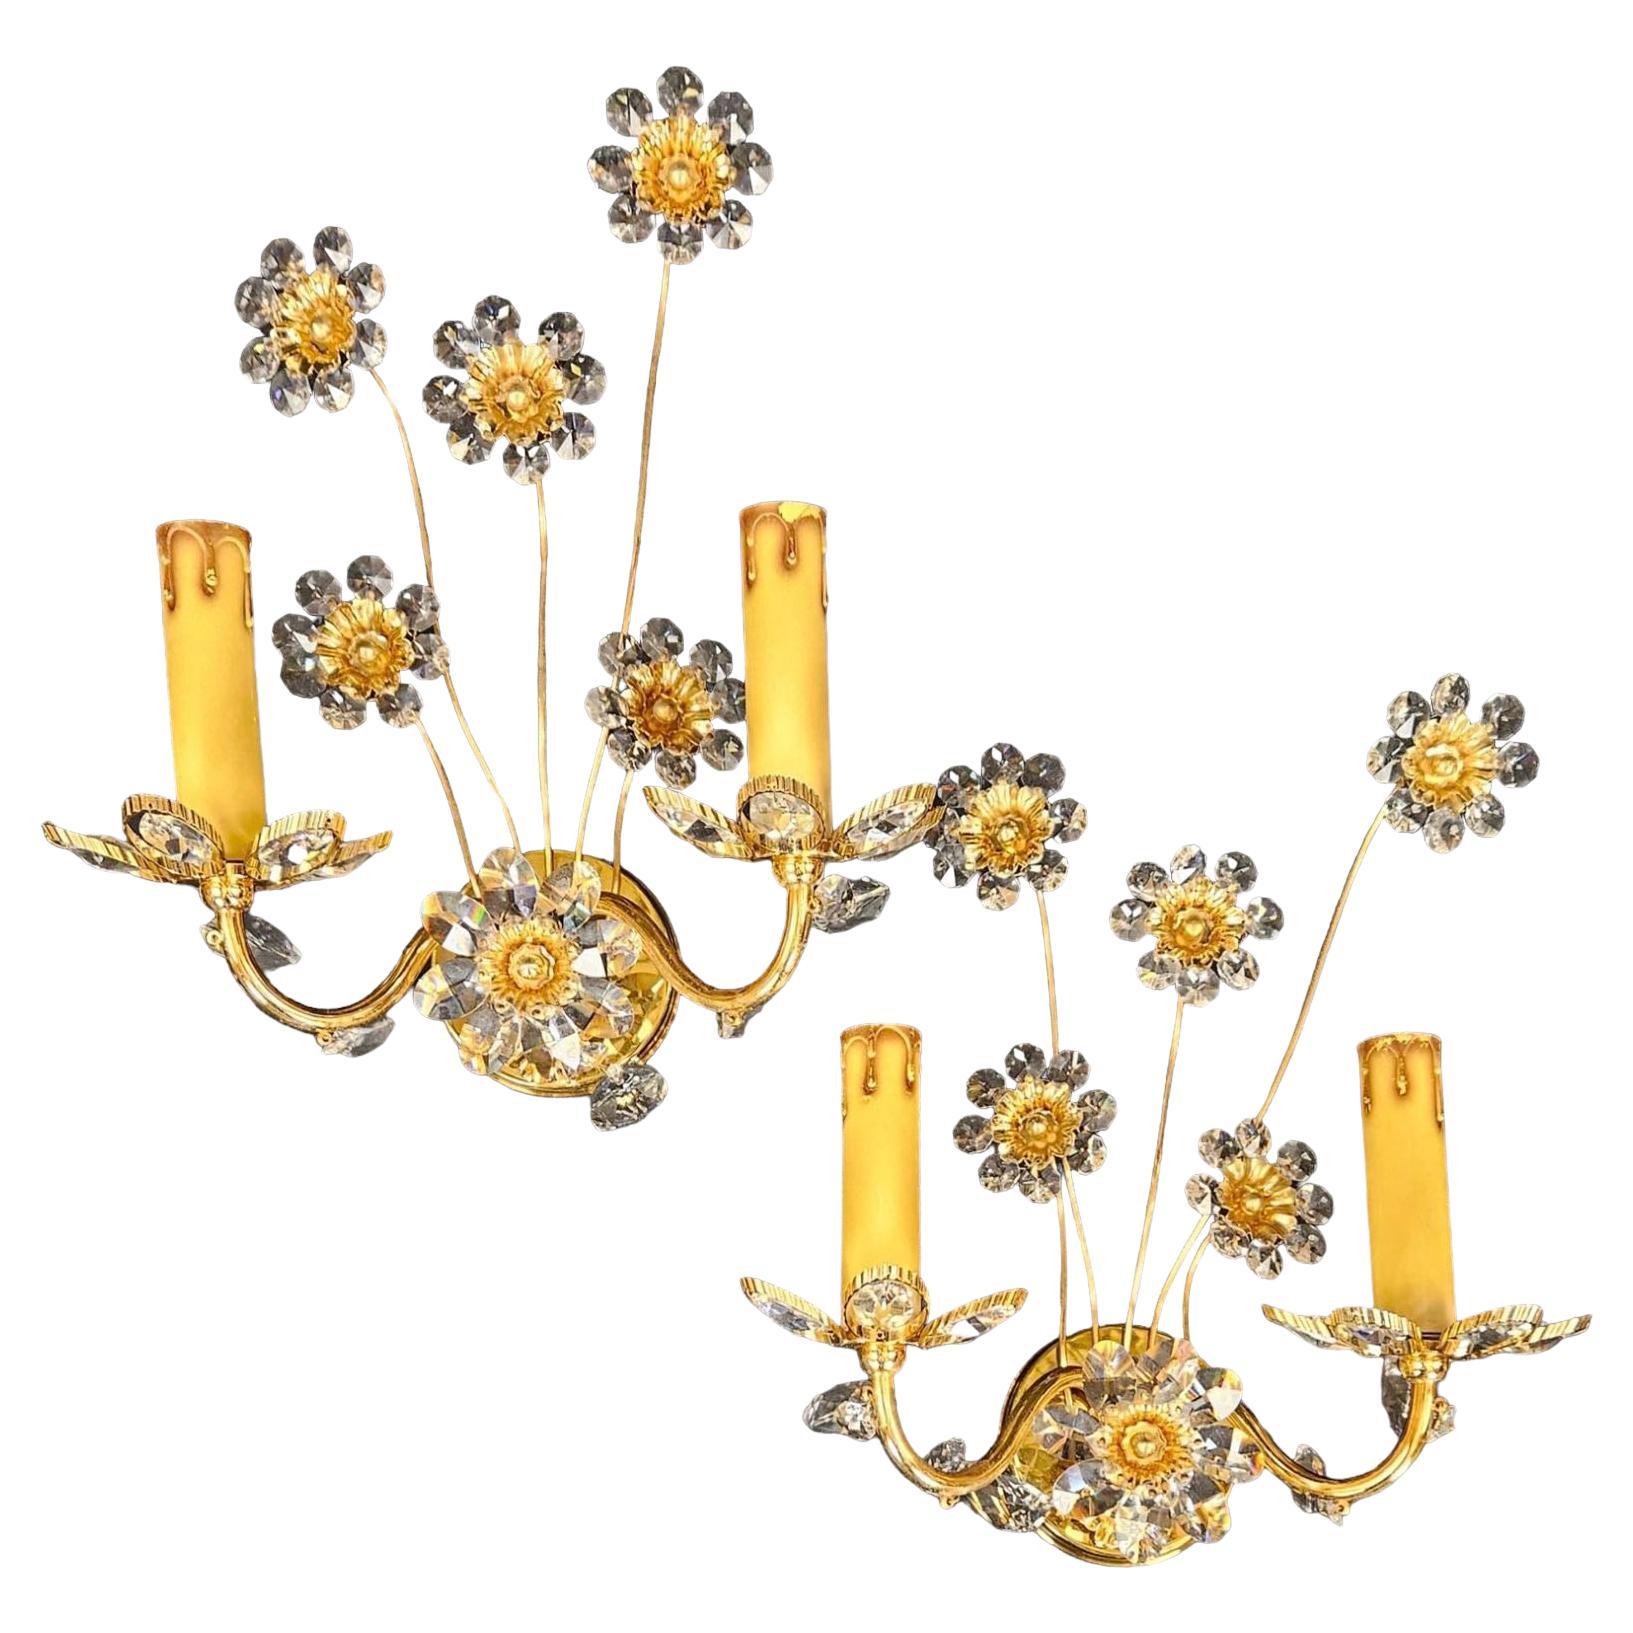 Stunning Pair of Vintage Gold-Plated "Palwa" Crystal Flower 2 Light Sconces